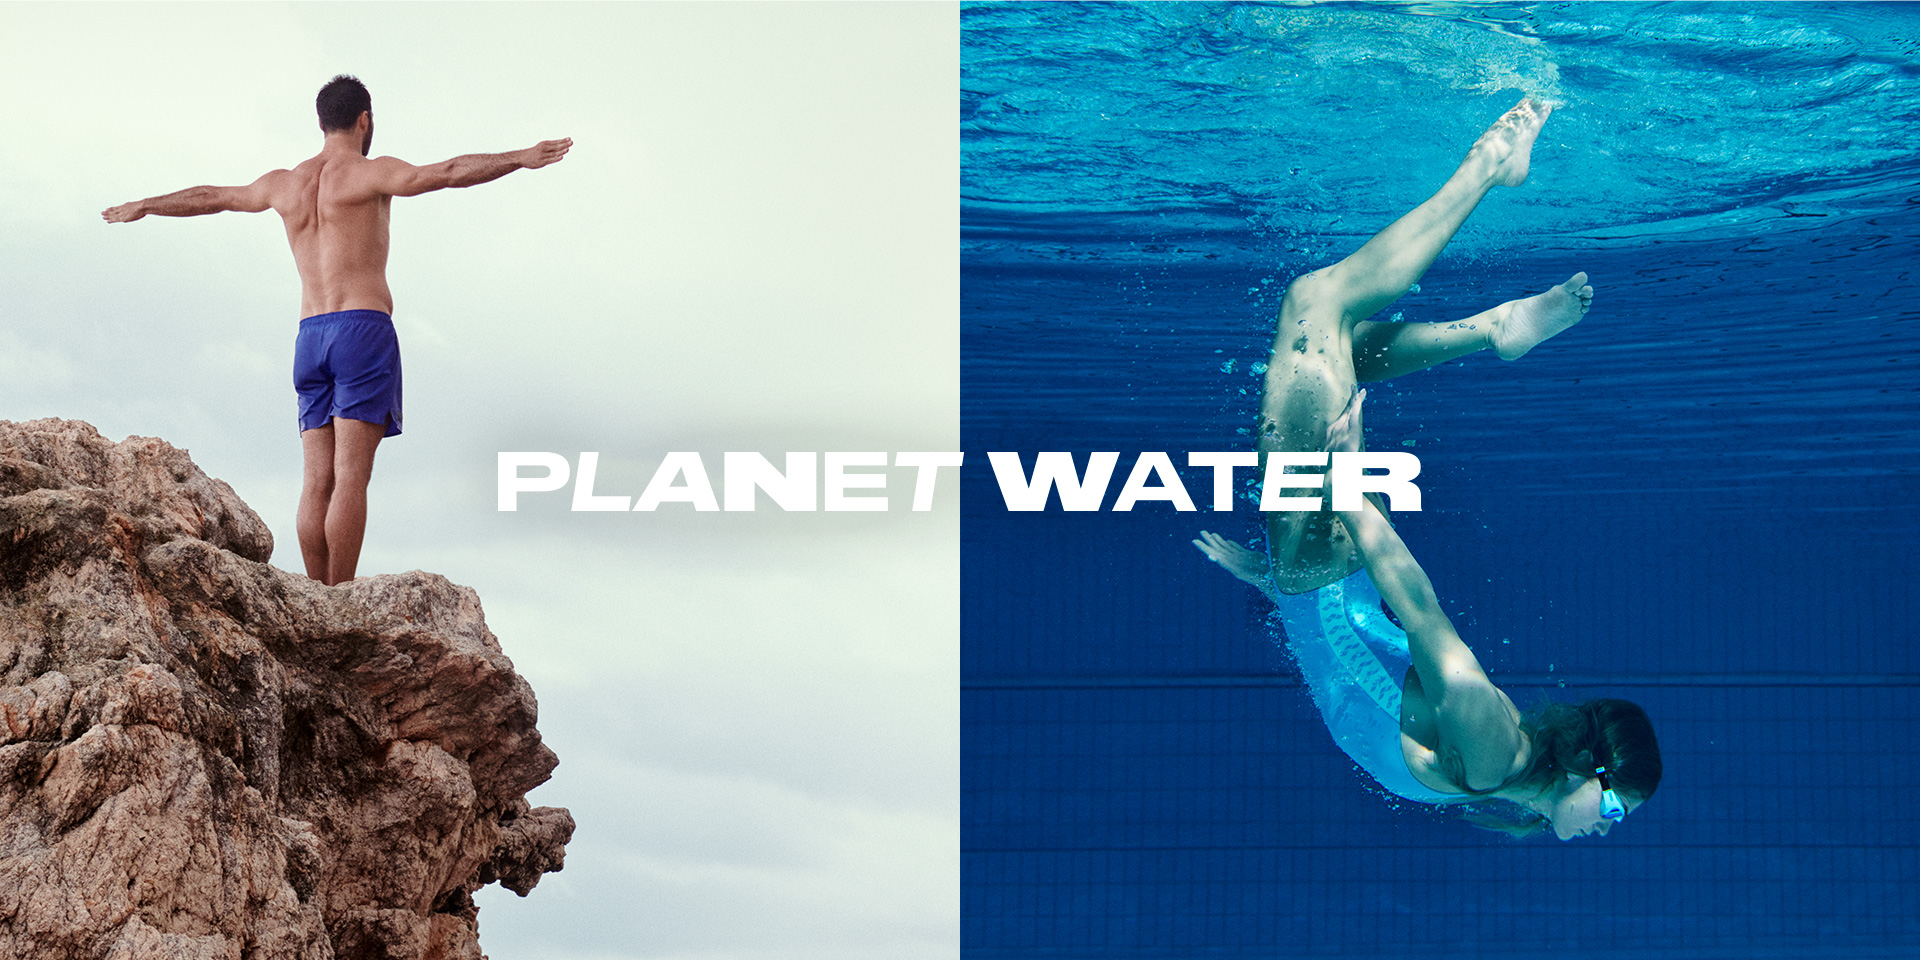 PLANET WATER